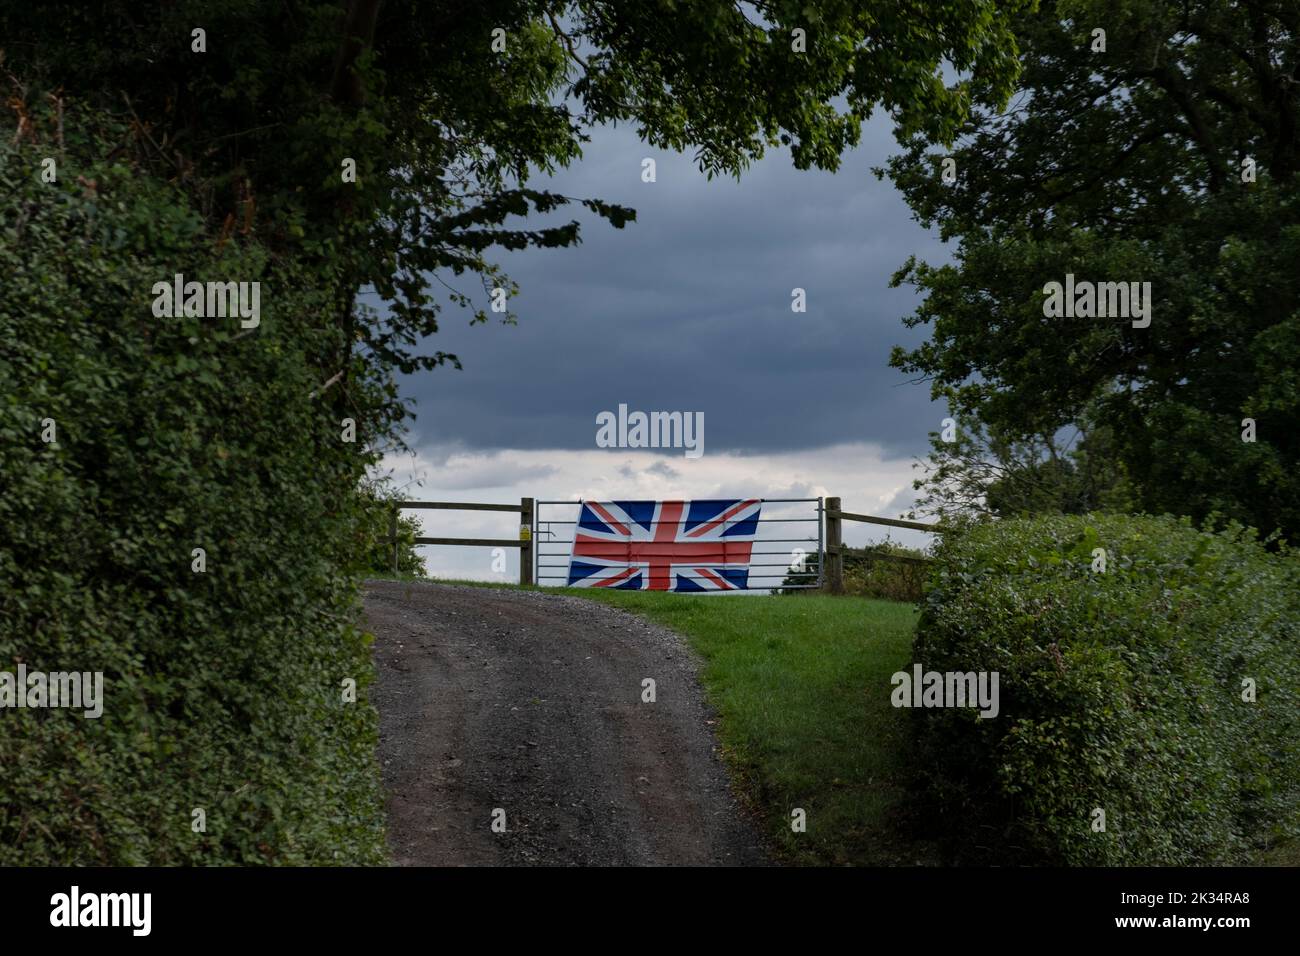 The Union Jack flag attached to a farm gate in The Worcestershire countryside show belief in the British Monarchy. Stock Photo